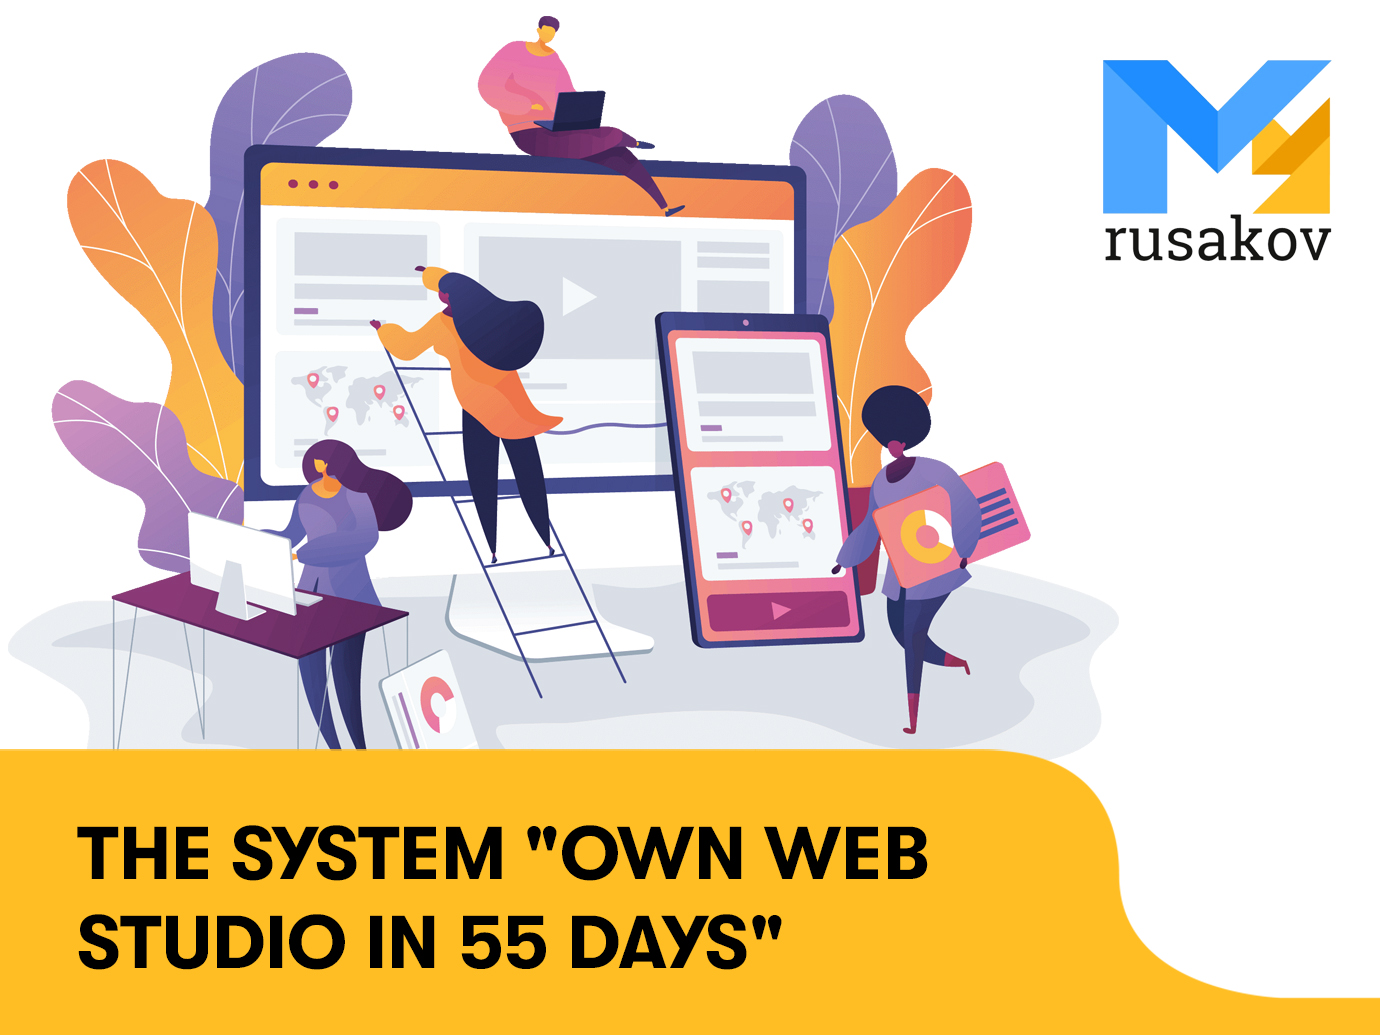 The system “Own Web studio in 55 days“